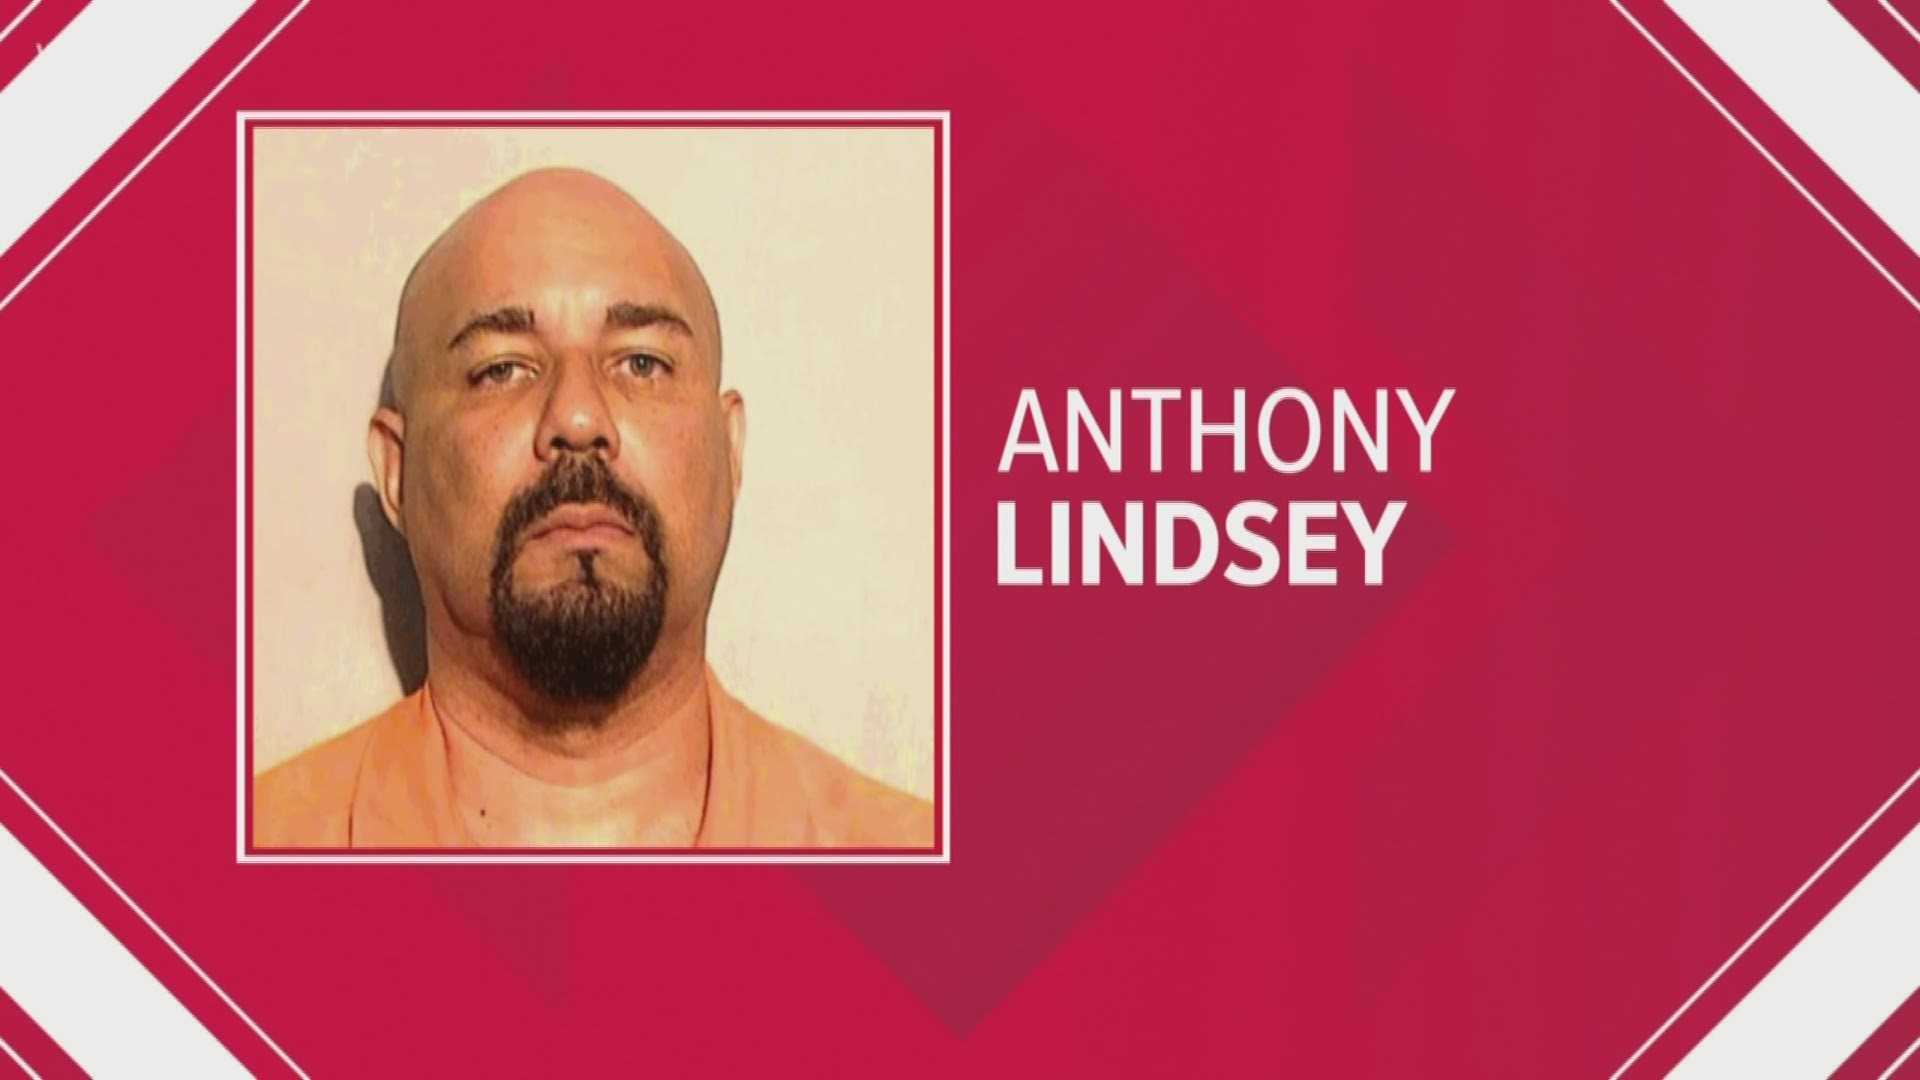 Police say Anthony Lindsey, 46, offered the victim a ride and drove her to his home, where he sexually assaulted her at least twice over the course of an hour.